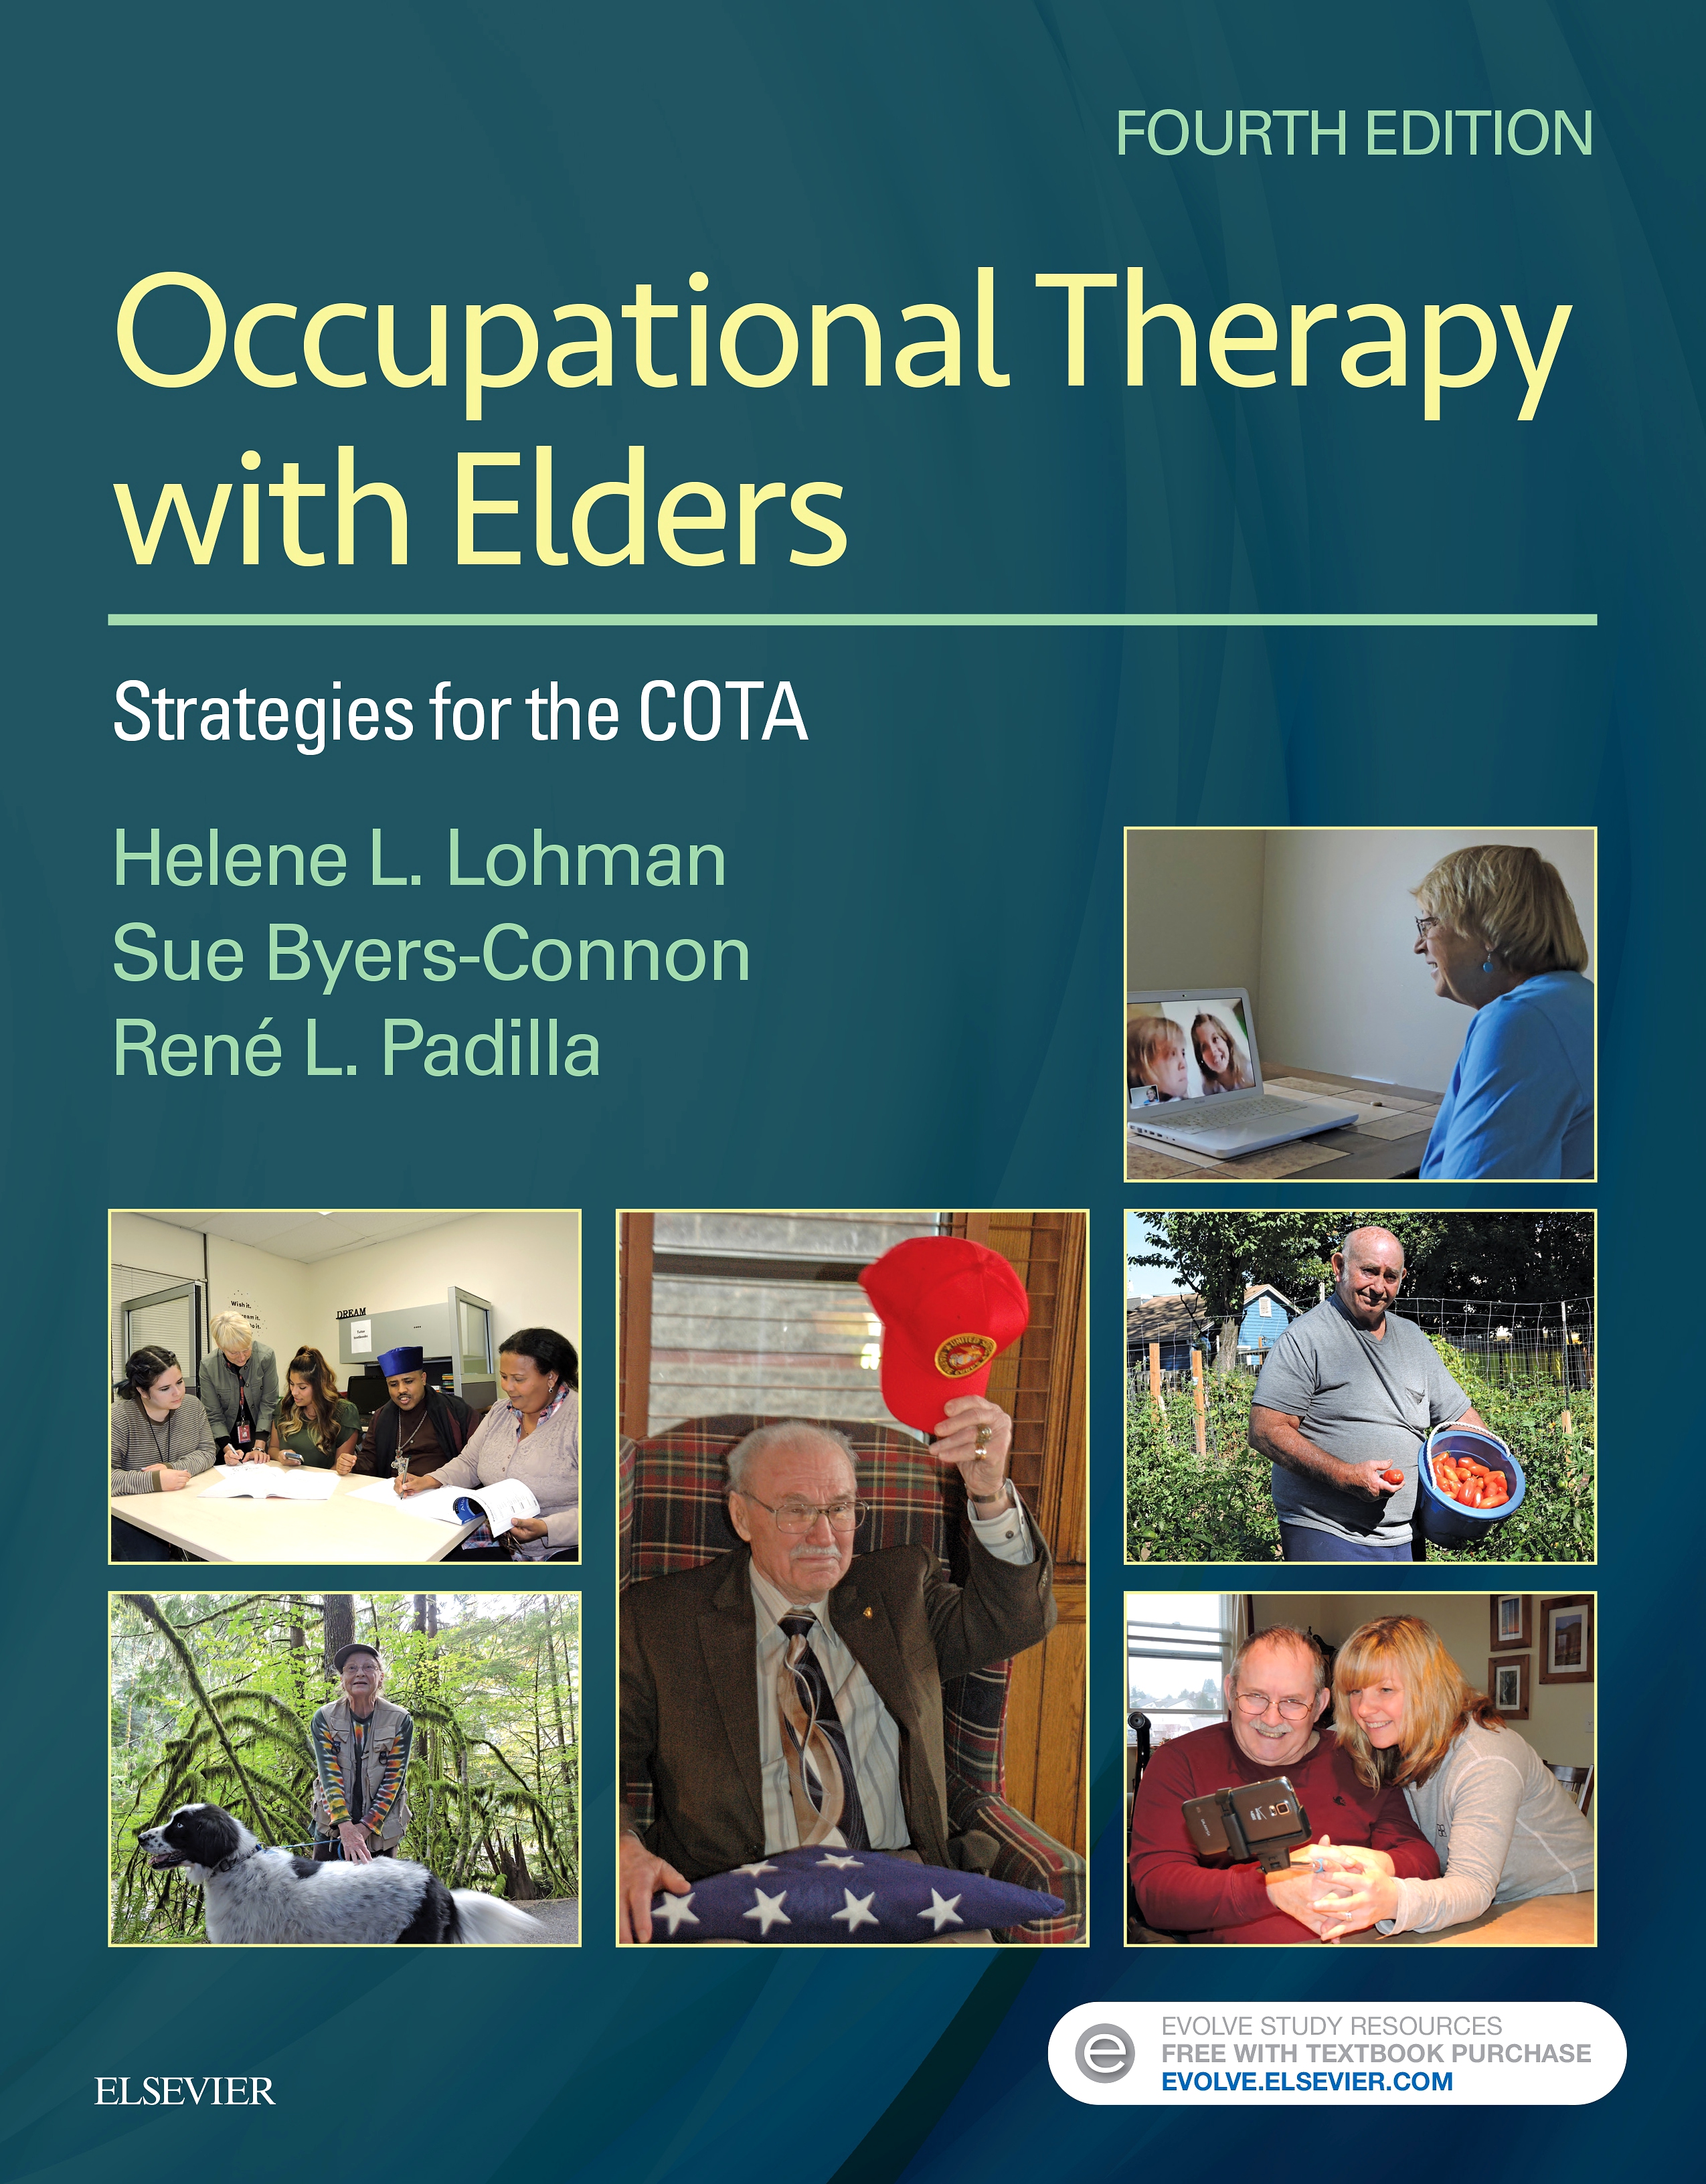 Evolve Resources for Occupational Therapy with Elders, 4th